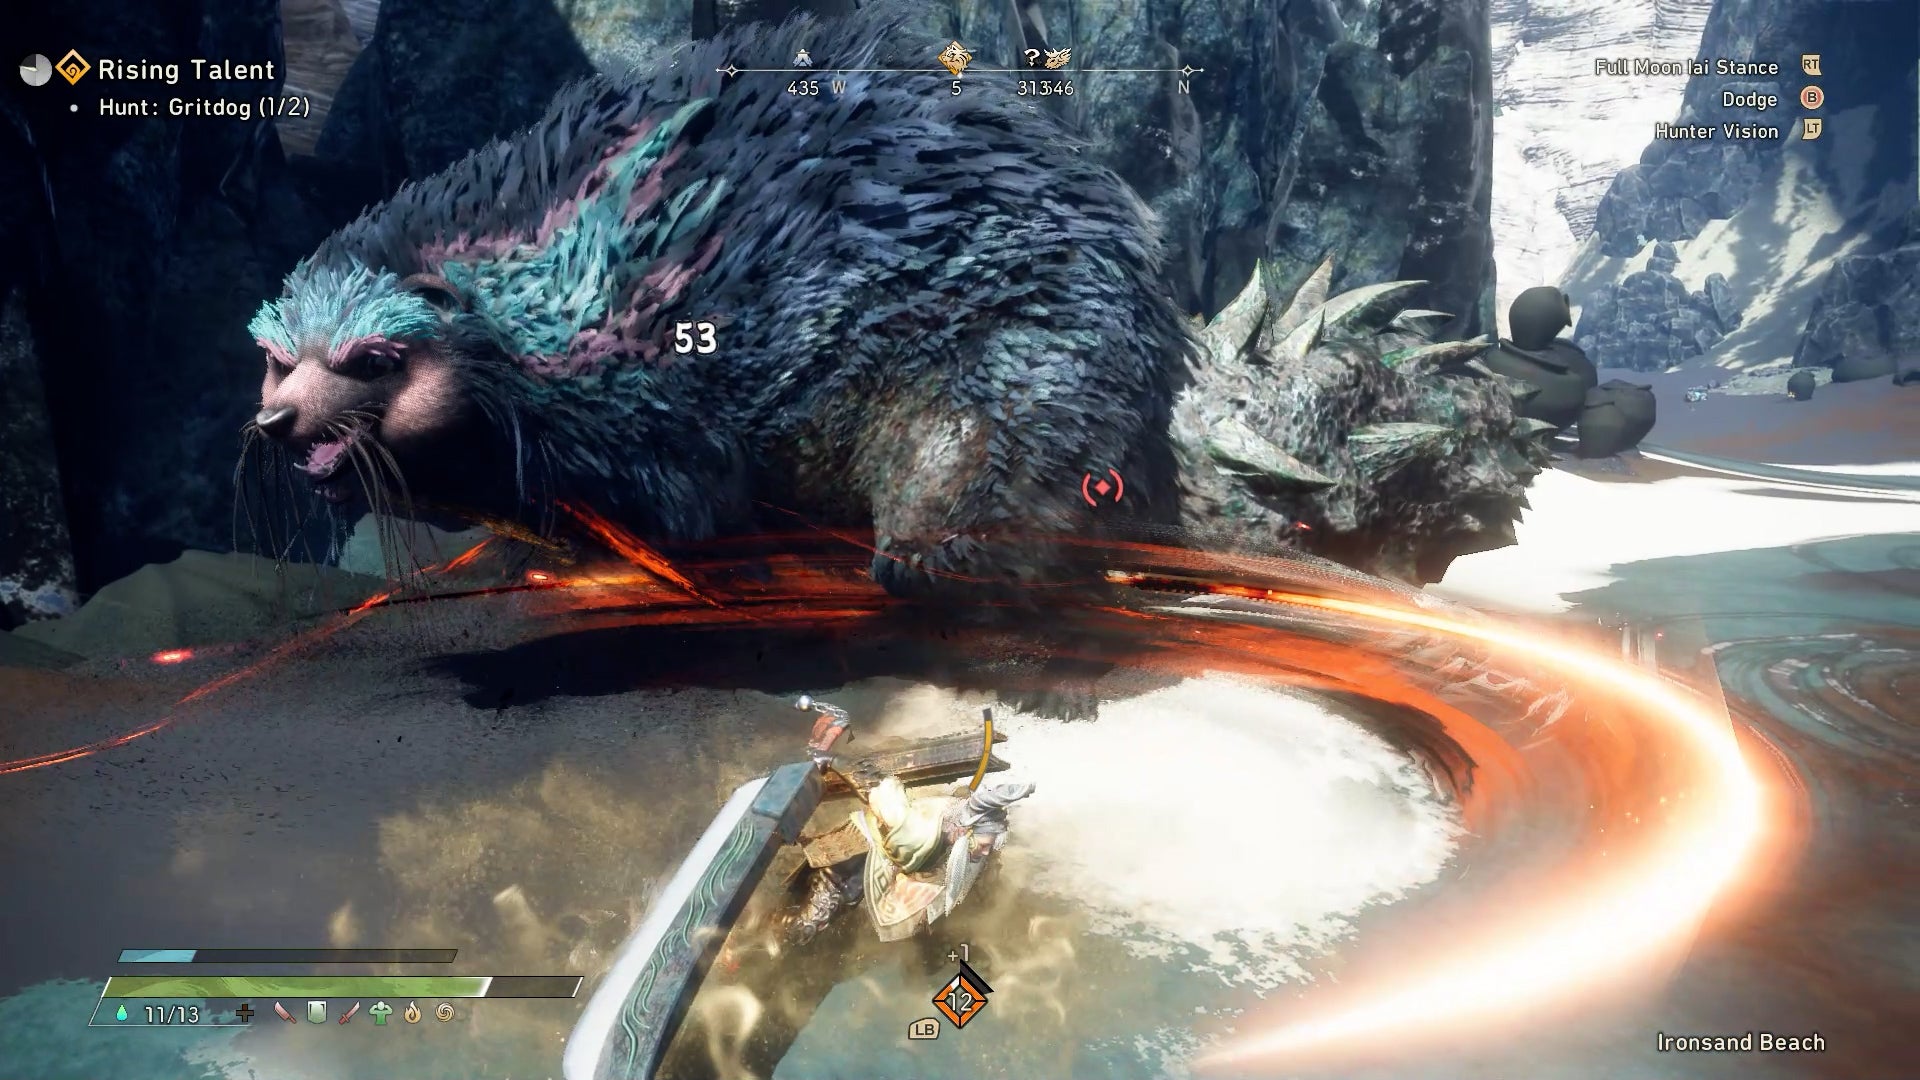 A huge dog-like creature is attacked by a hunter with a large sword.